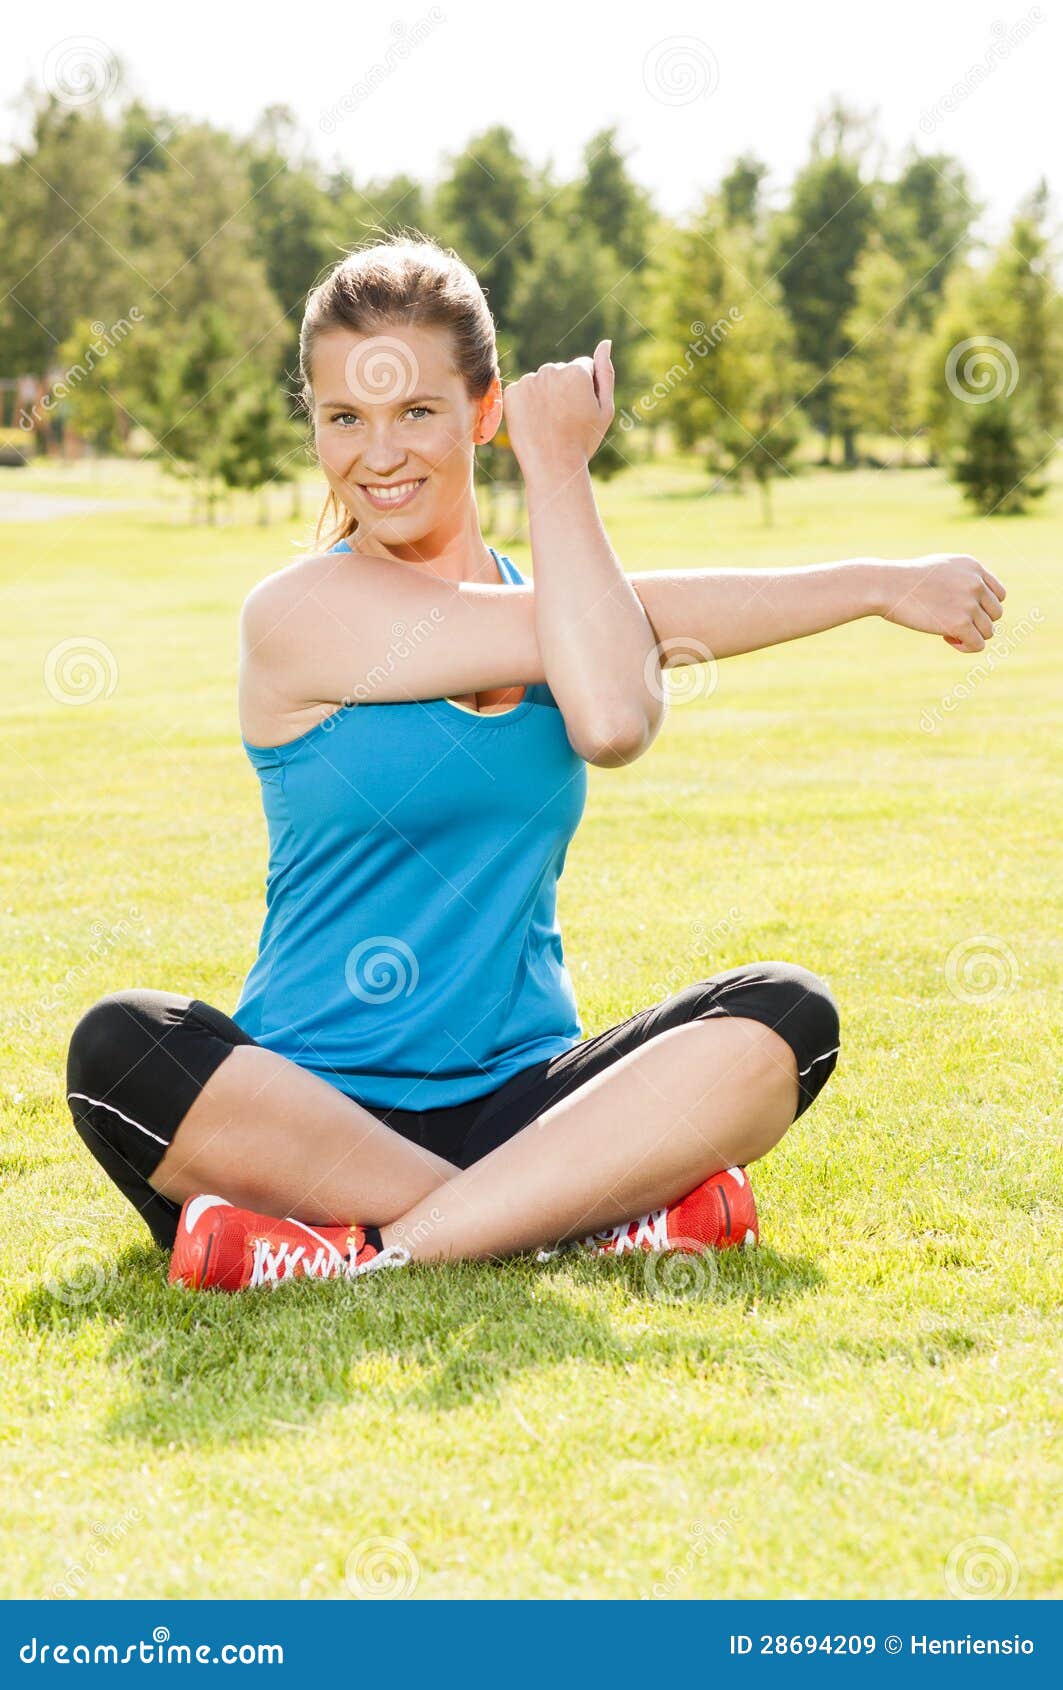 ... : Happy woman jogger training in the park. Healthy lifestyle and p